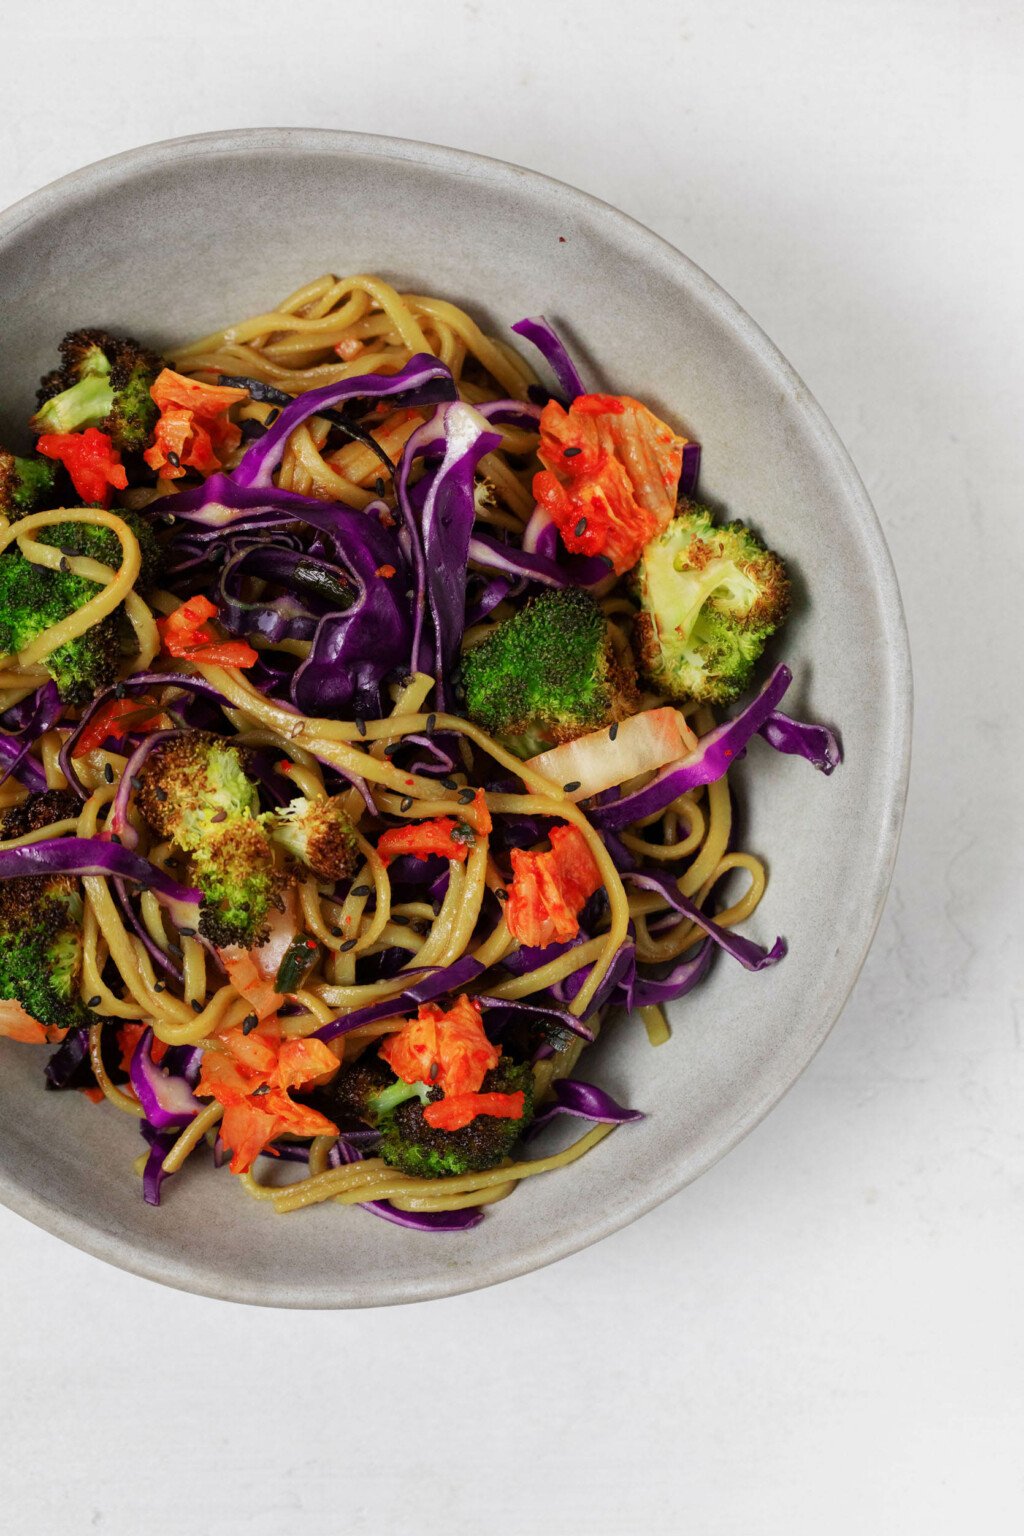 An overhead image of a bright, colorful mix of noodles, roasted broccoli, and crunchy red cabbage, all plated in a gray ceramic bowl.